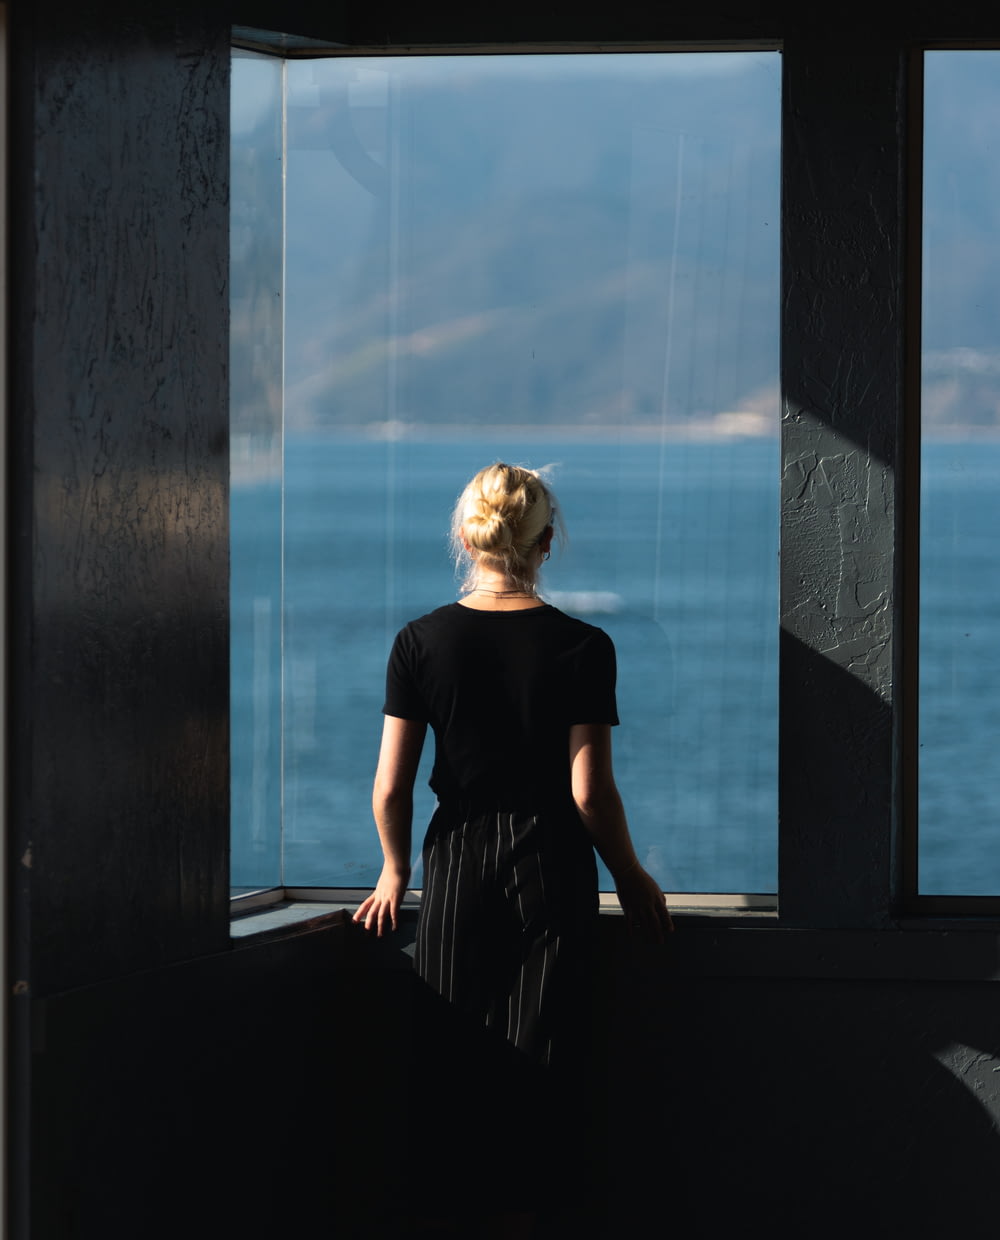 person wearing black t-shirt standing near glass window while facing on body of water